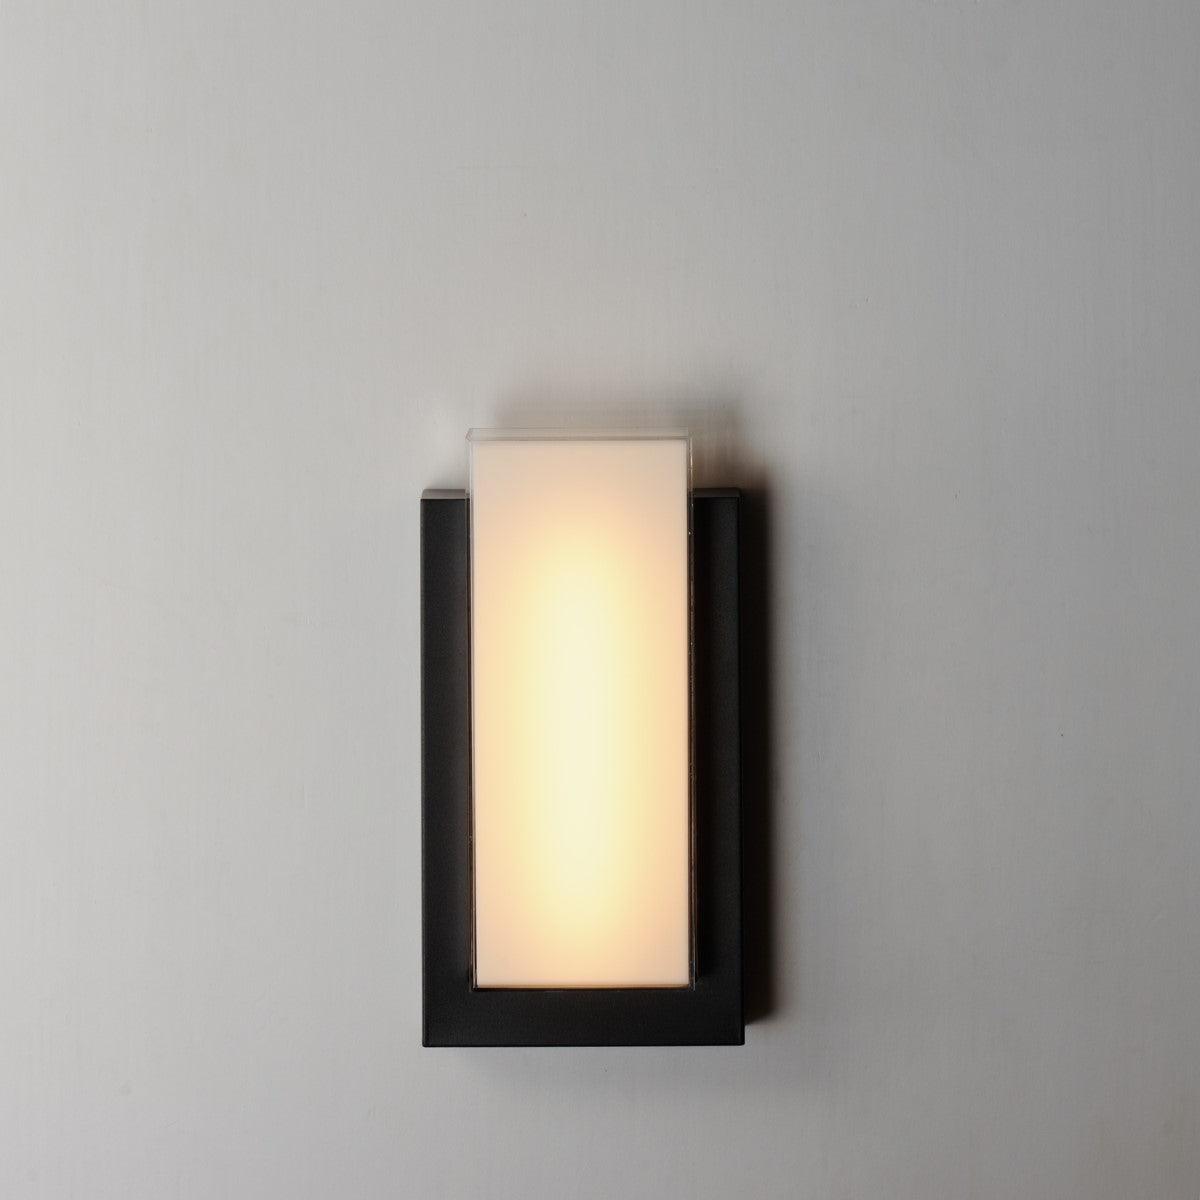 Tower 15 in. LED Outdoor Wall Sconce 3000K Black Finish